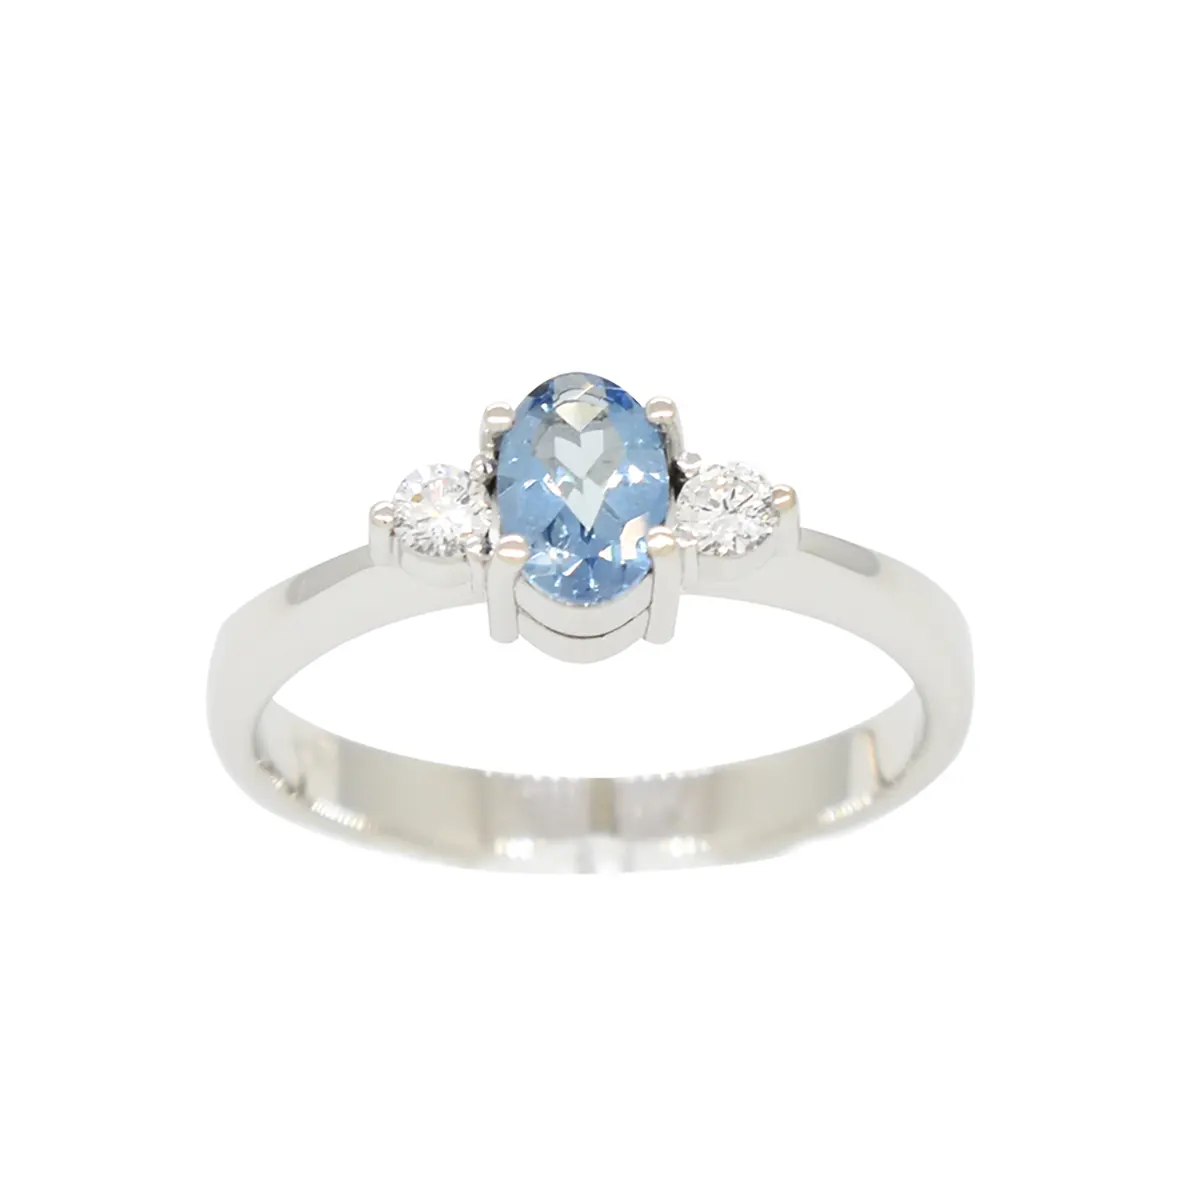 3 Stones Ring with Oval Shape Aquamarine and Brilliant Cut Diamonds in White Gold